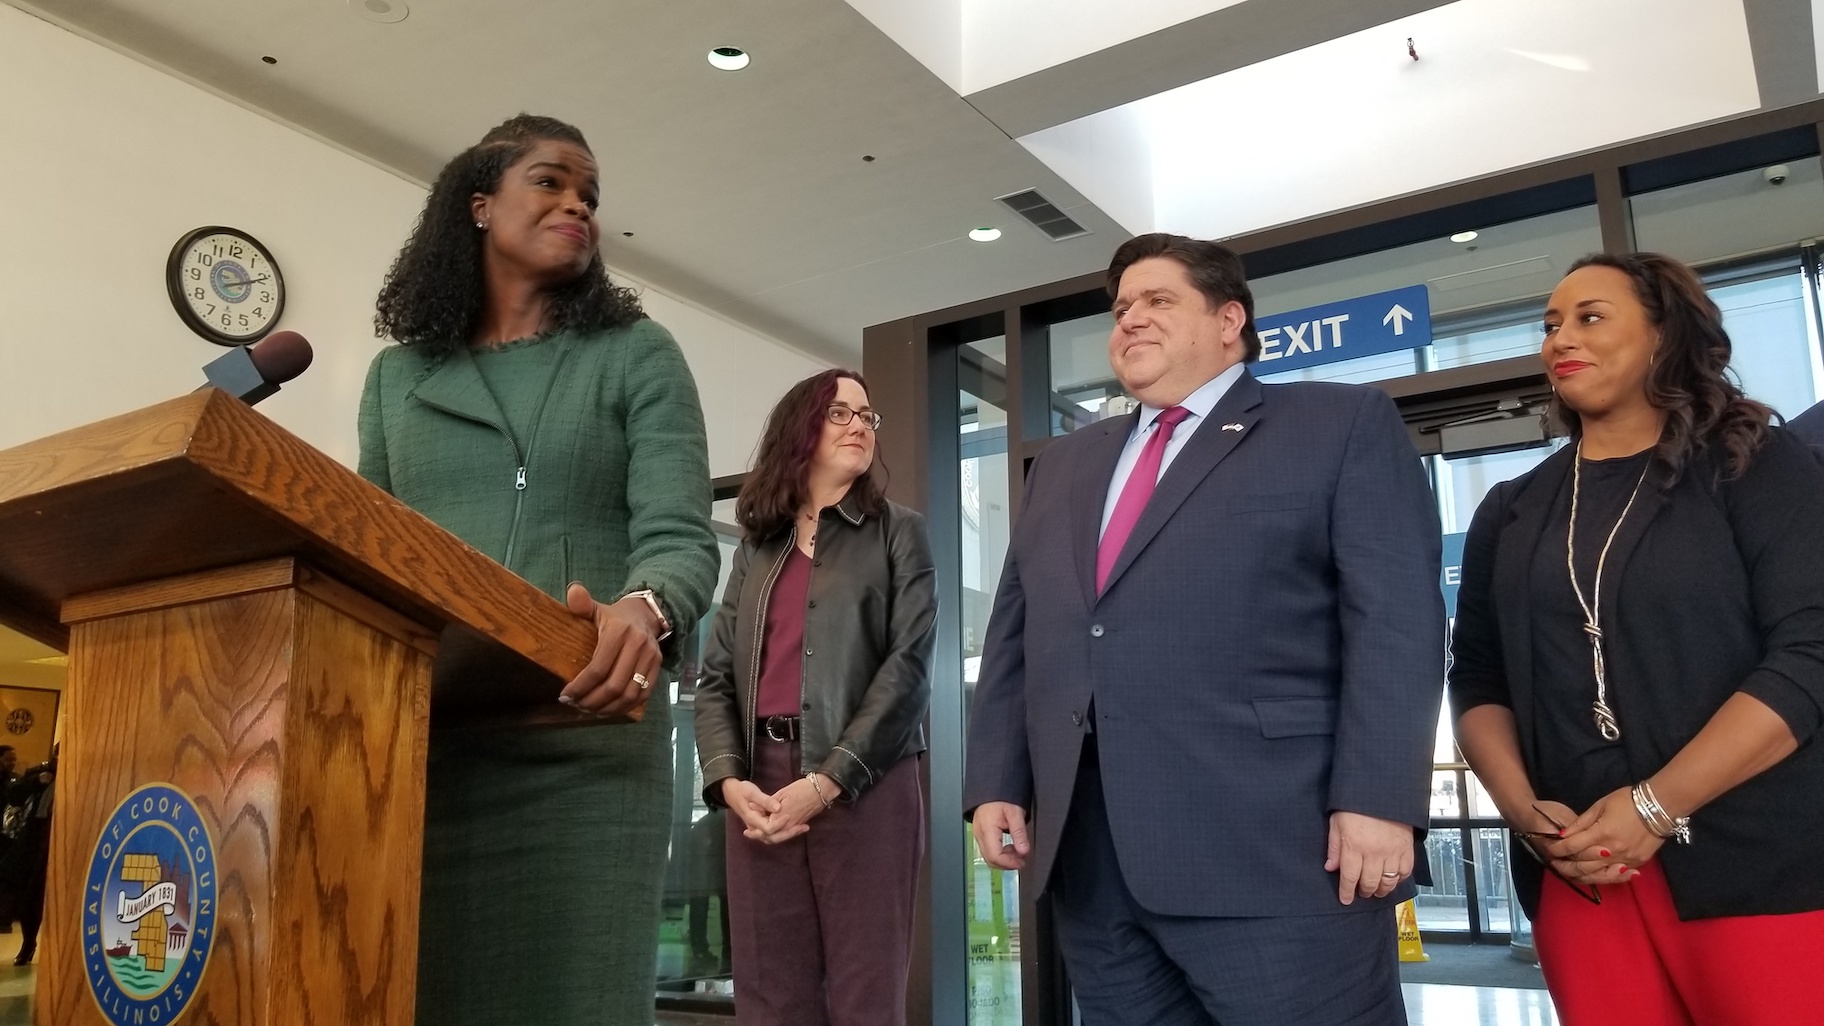 Cook County State’s Attorney Kim Foxx, left, stands beside Gov. J.B. Pritzker inside the lobby of the Leighton Criminal Court Building on Wednesday, Dec. 11, 2019. (Matt Masterson / WTTW News)